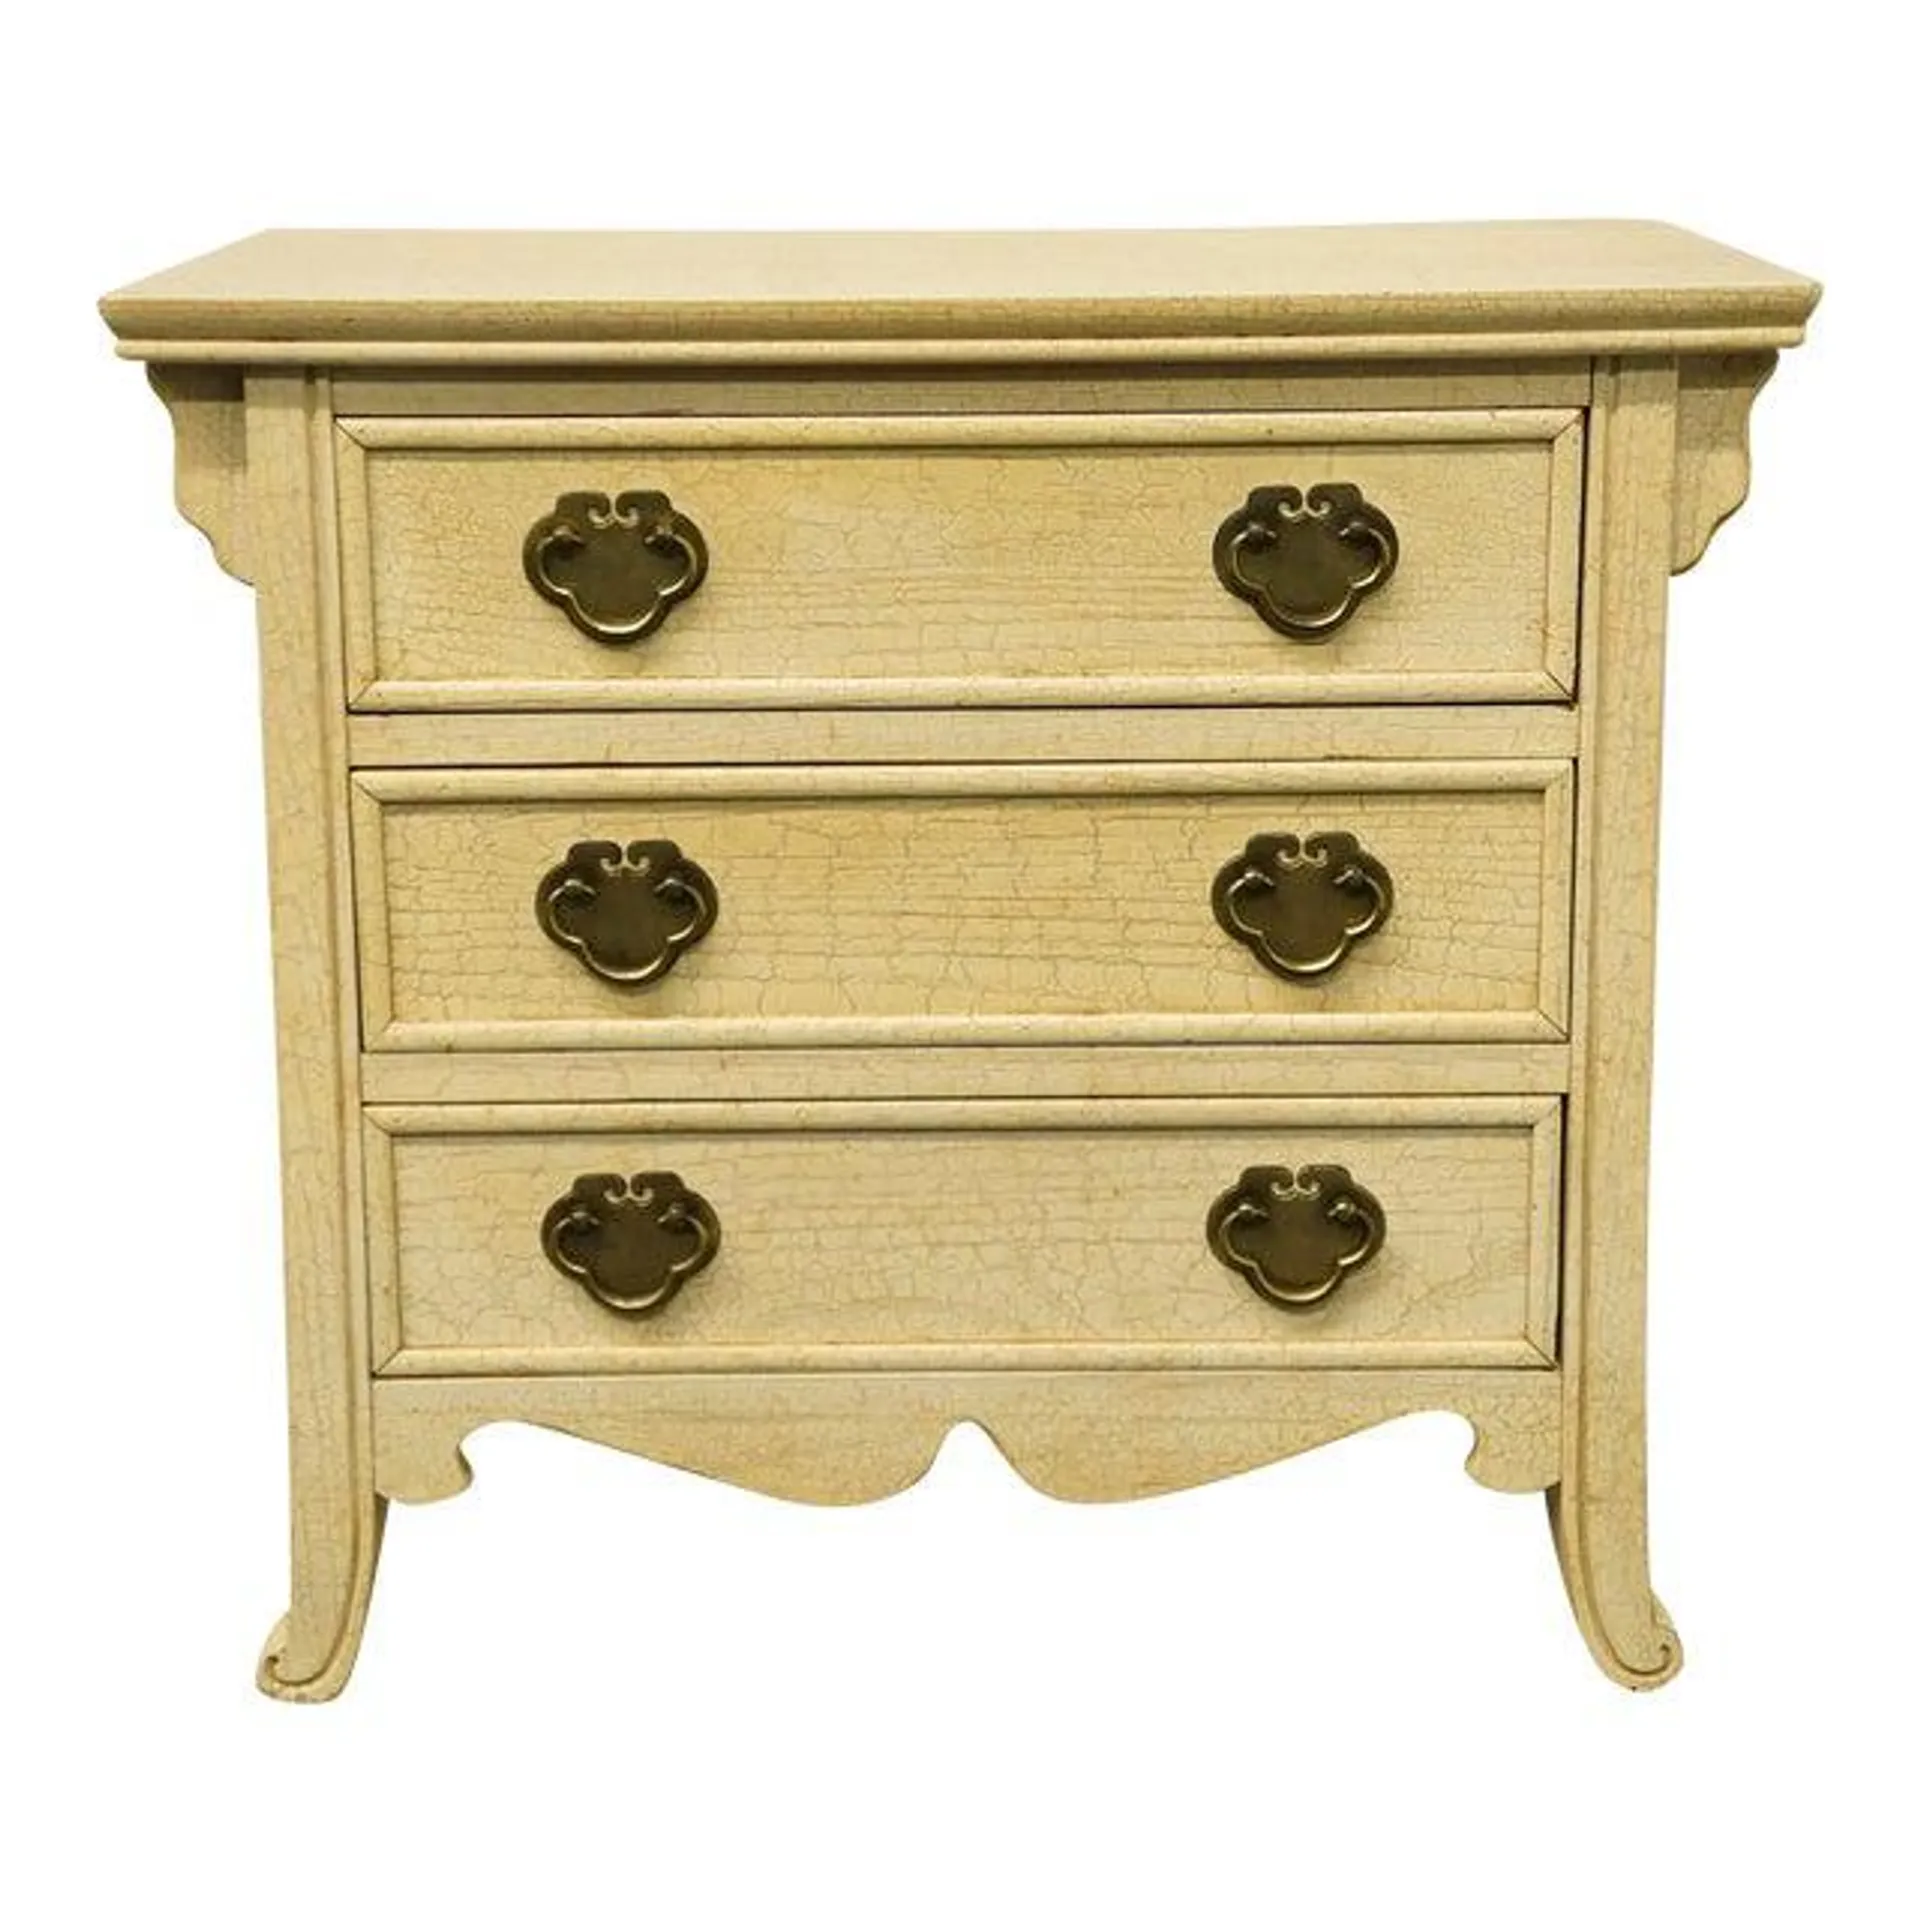 Lane Furniture Contemporary Modern 25" Three Drawer Chairside Chest / Nightstand W. Cream / Off White Antiqued Crackle Finish